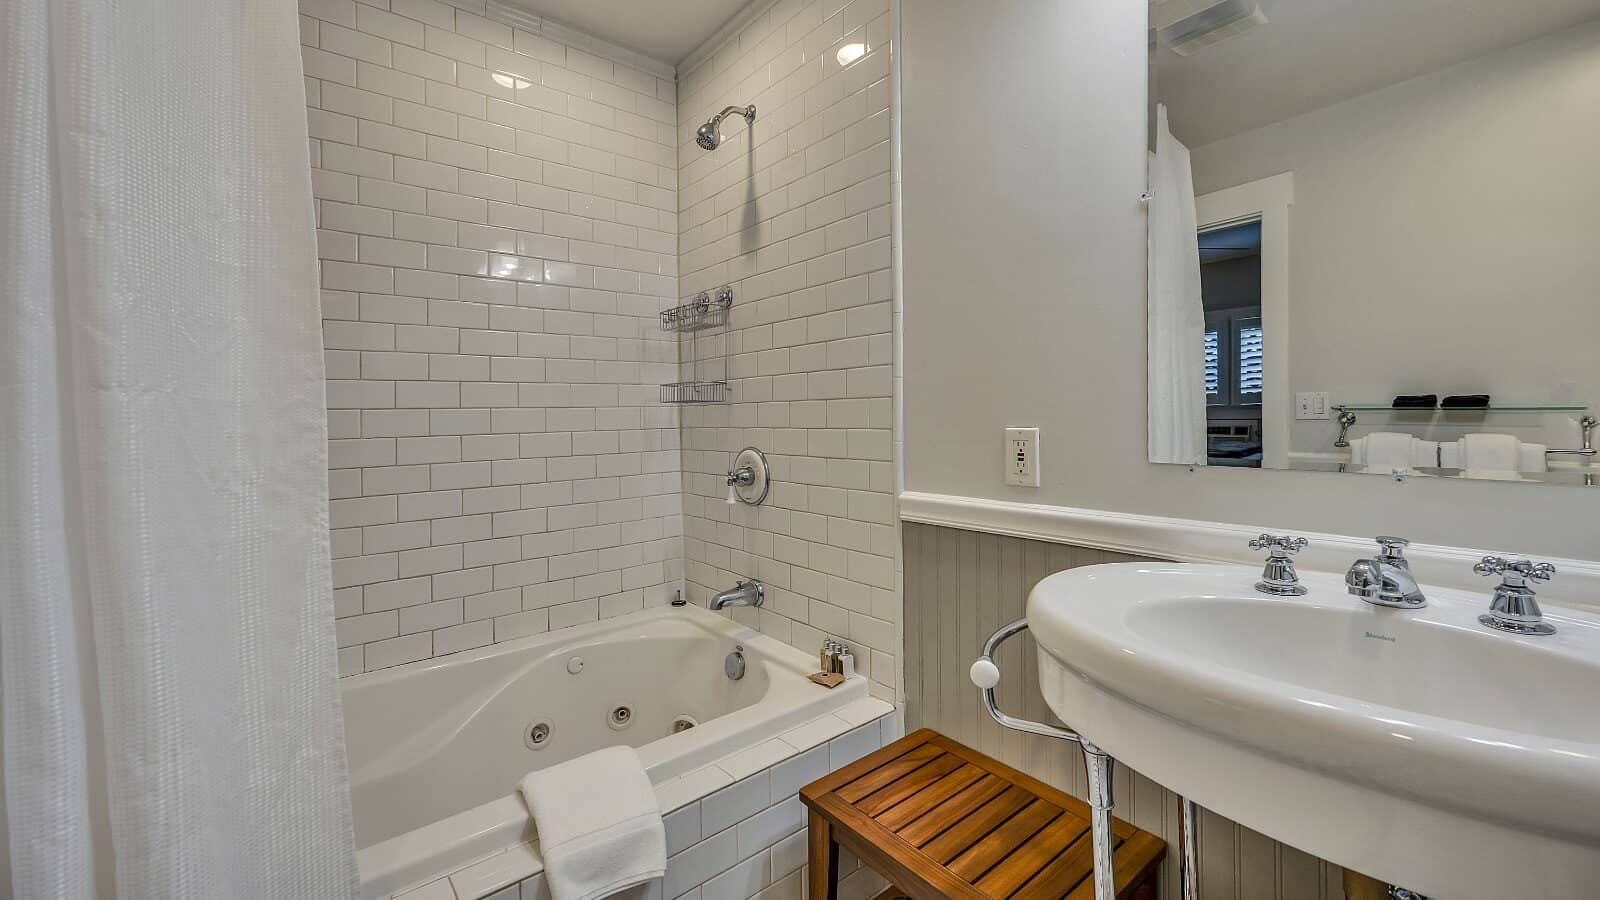 Bathroom with white walls, light gray wainscotting, white tiled shower and tub combo, and white sink